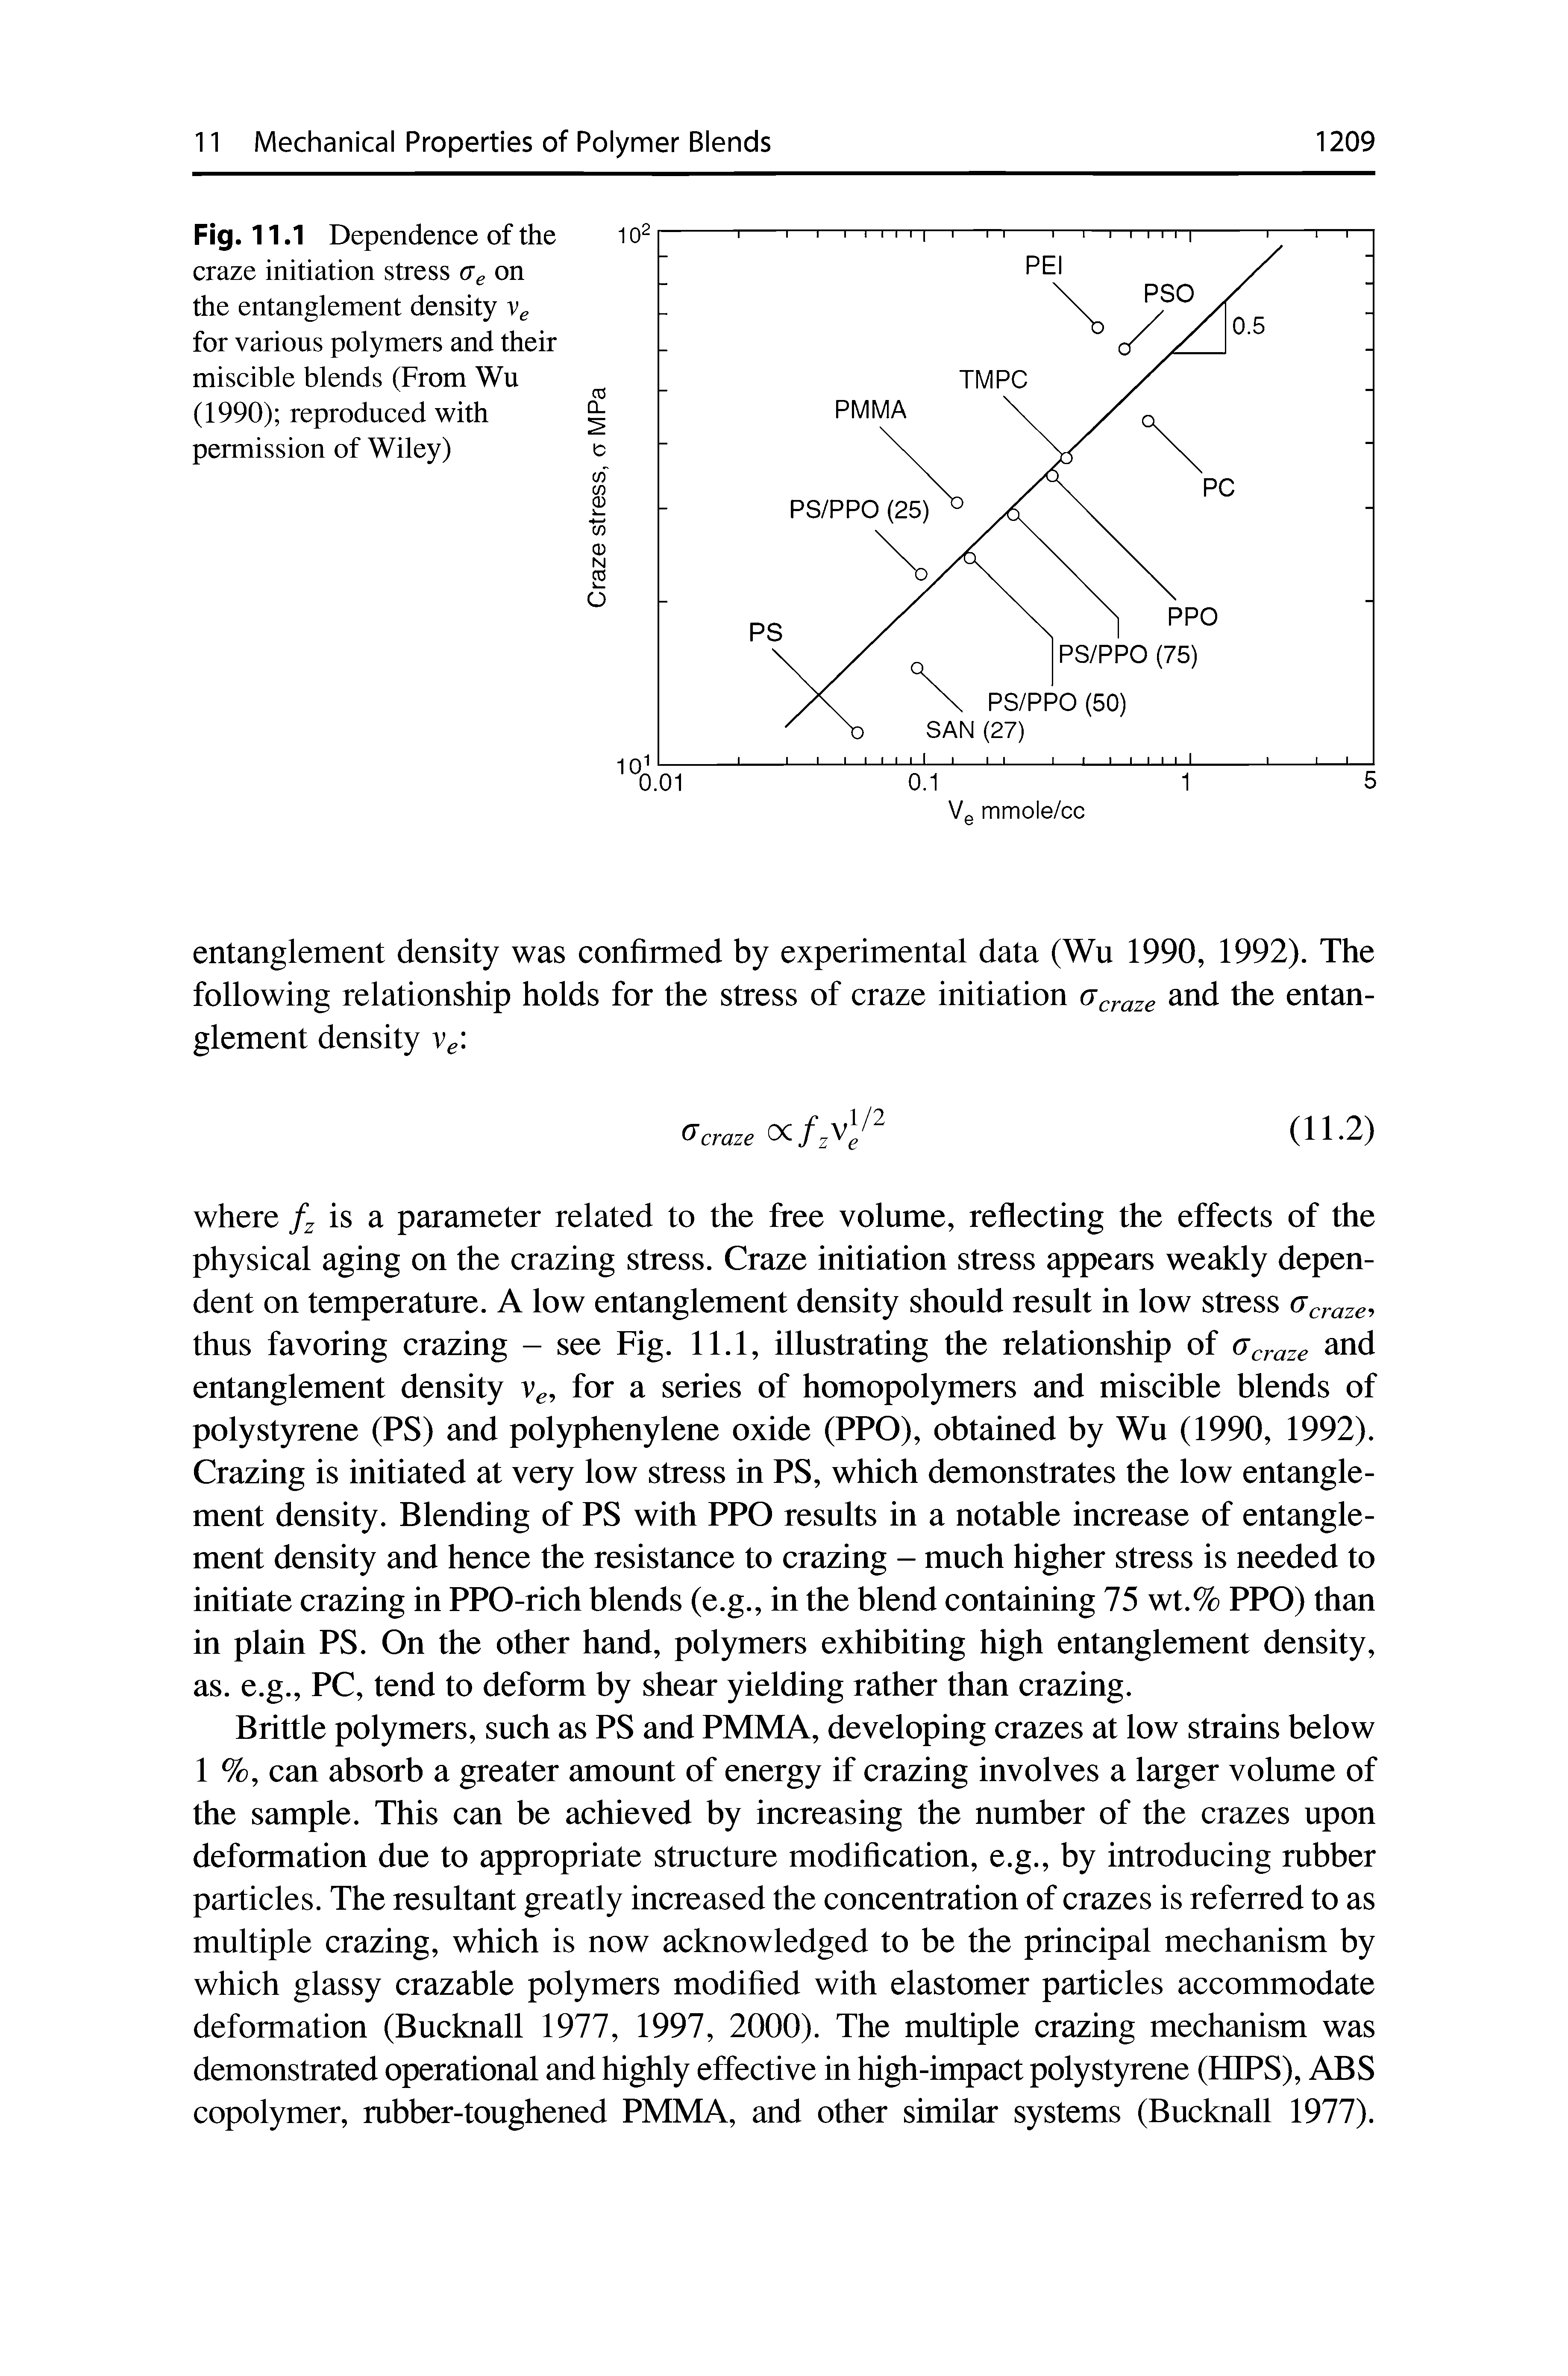 Fig. 11.1 Dependence of the craze initiation stress Gg on the entanglement density Vg for various polymers and their miscible blends (From Wu (1990) reproduced with permission of Wiley)...